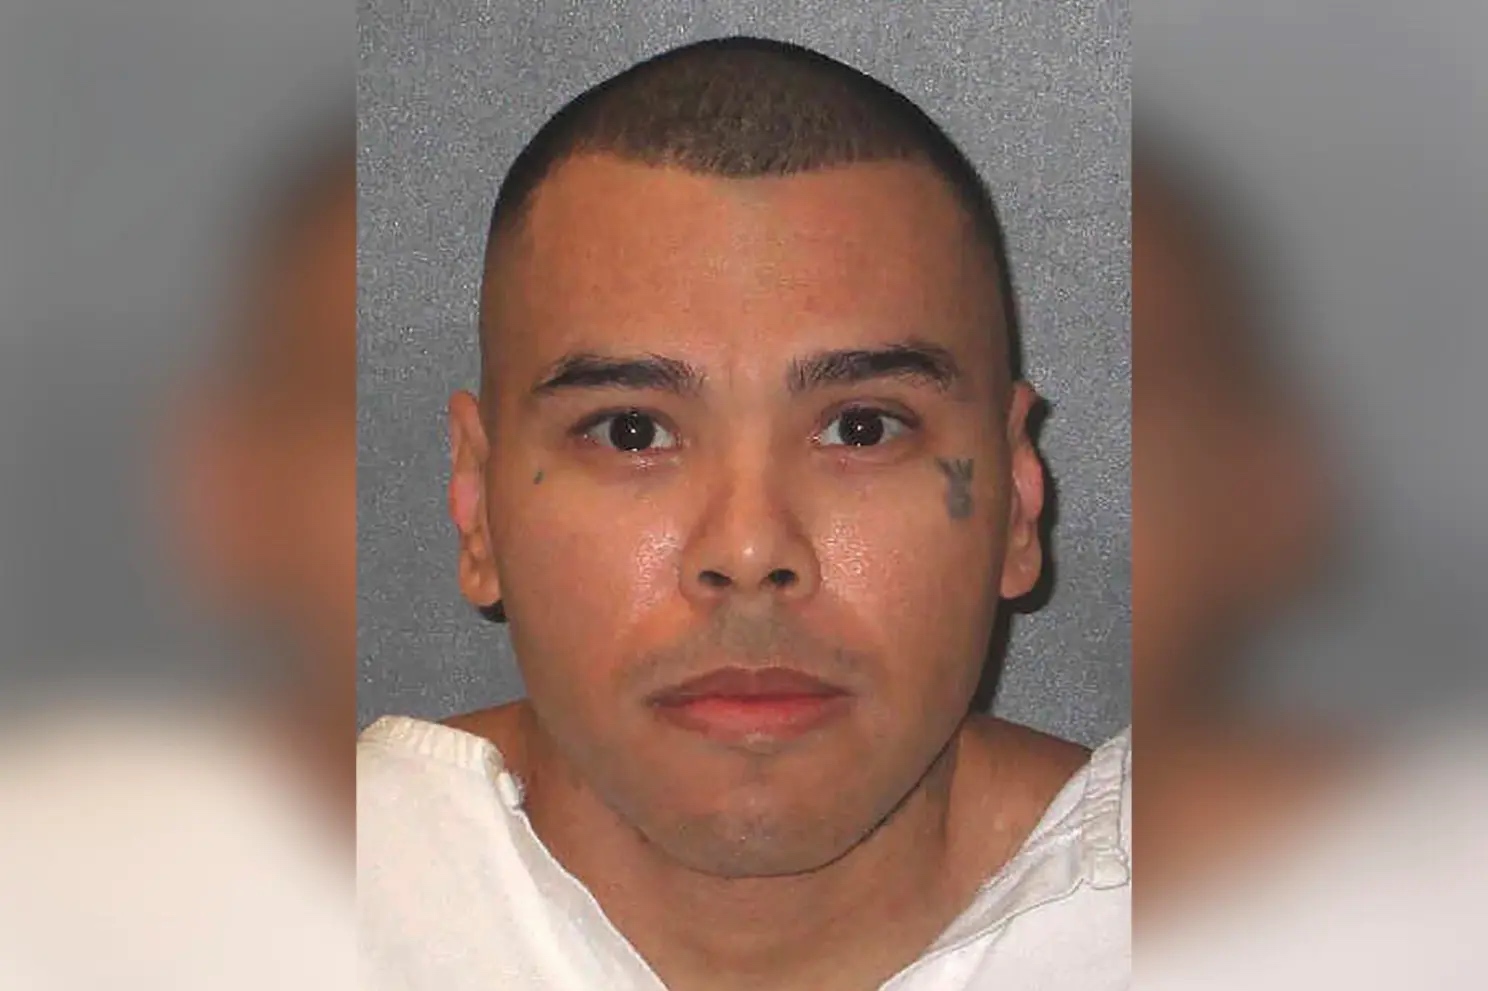 https://nypost.com/2022/07/02/texas-death-row-inmate-ramiro-gonzales-asks-for-execution-delay-to-donate-kidney/